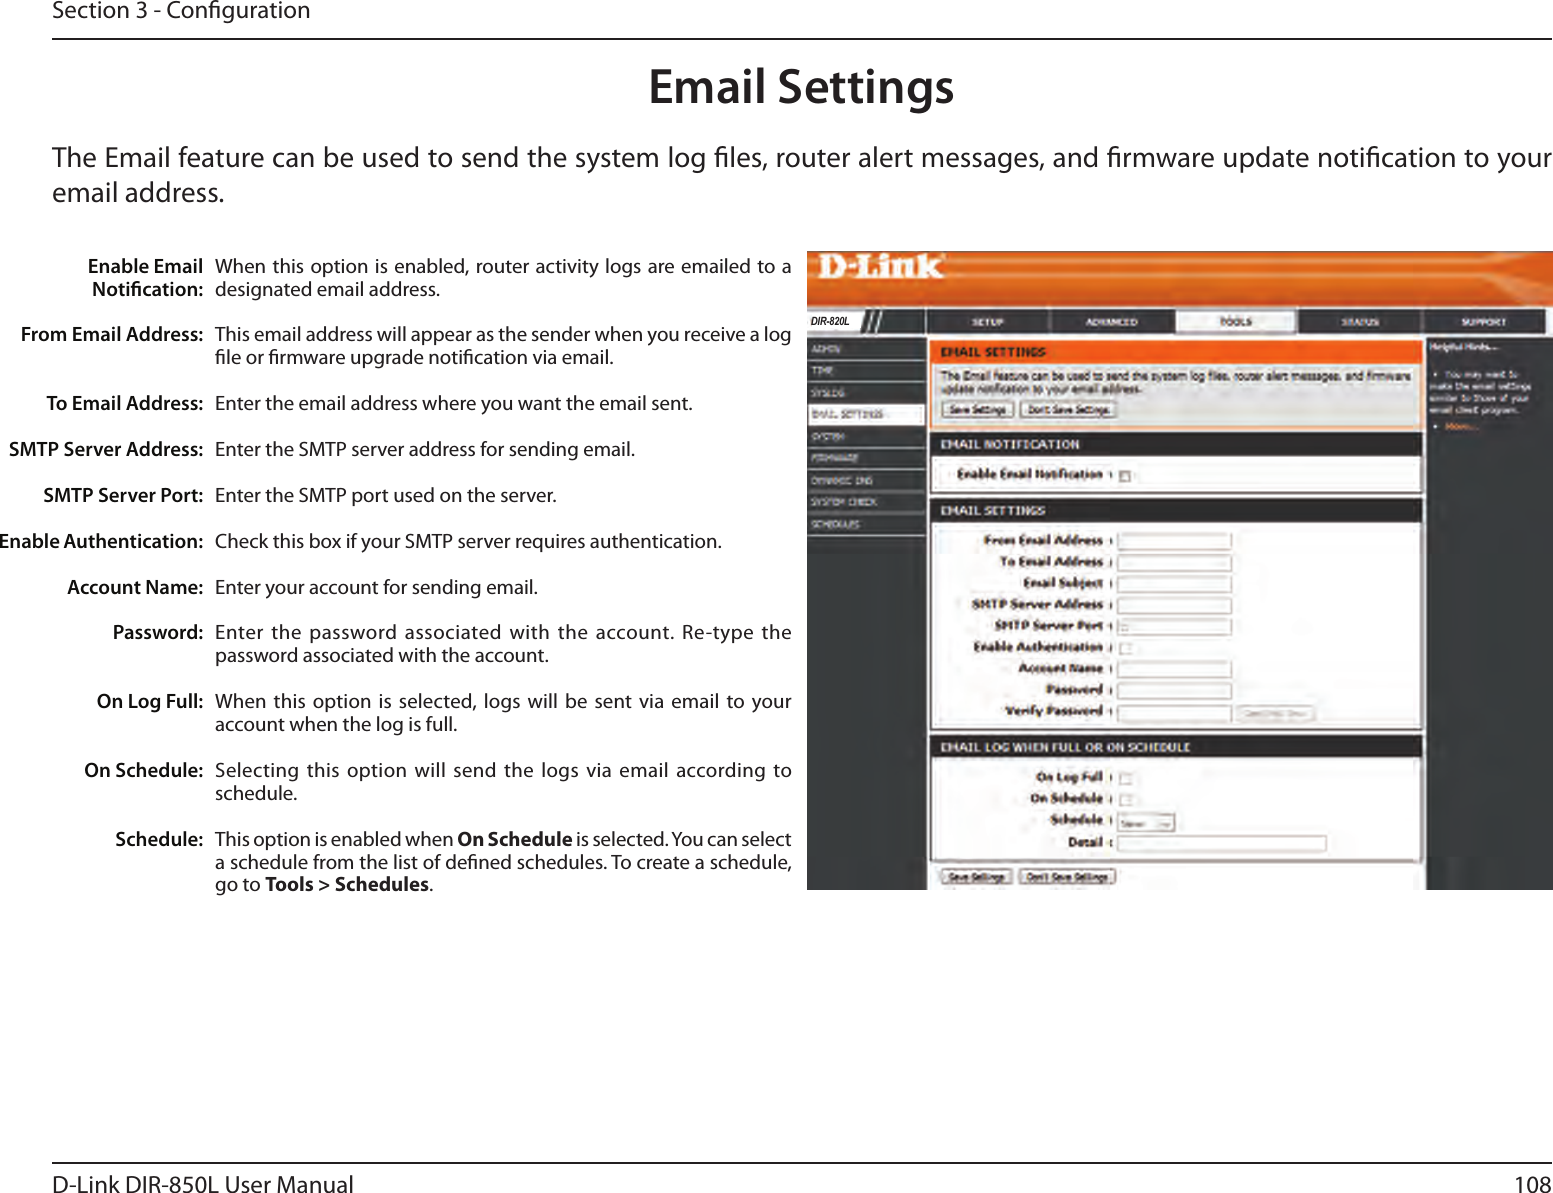 108D-Link DIR-850L User ManualSection 3 - CongurationEmail SettingsThe Email feature can be used to send the system log les, router alert messages, and rmware update notication to your email address. Enable Email Notication: From Email Address:To Email Address:SMTP Server Address:SMTP Server Port:Enable Authentication:Account Name:Password:On Log Full:On Schedule:Schedule:When this option is enabled, router activity logs are emailed to a designated email address.This email address will appear as the sender when you receive a log le or rmware upgrade notication via email.Enter the email address where you want the email sent. Enter the SMTP server address for sending email. Enter the SMTP port used on the server.Check this box if your SMTP server requires authentication. Enter your account for sending email.Enter the  password associated with the account. Re-type the password associated with the account.When this option  is selected, logs will  be sent via email  to your account when the log is full.Selecting  this option will send  the  logs via email according to schedule.This option is enabled when On Schedule is selected. You can select a schedule from the list of dened schedules. To create a schedule, go to Tools &gt; Schedules.DIR-820L